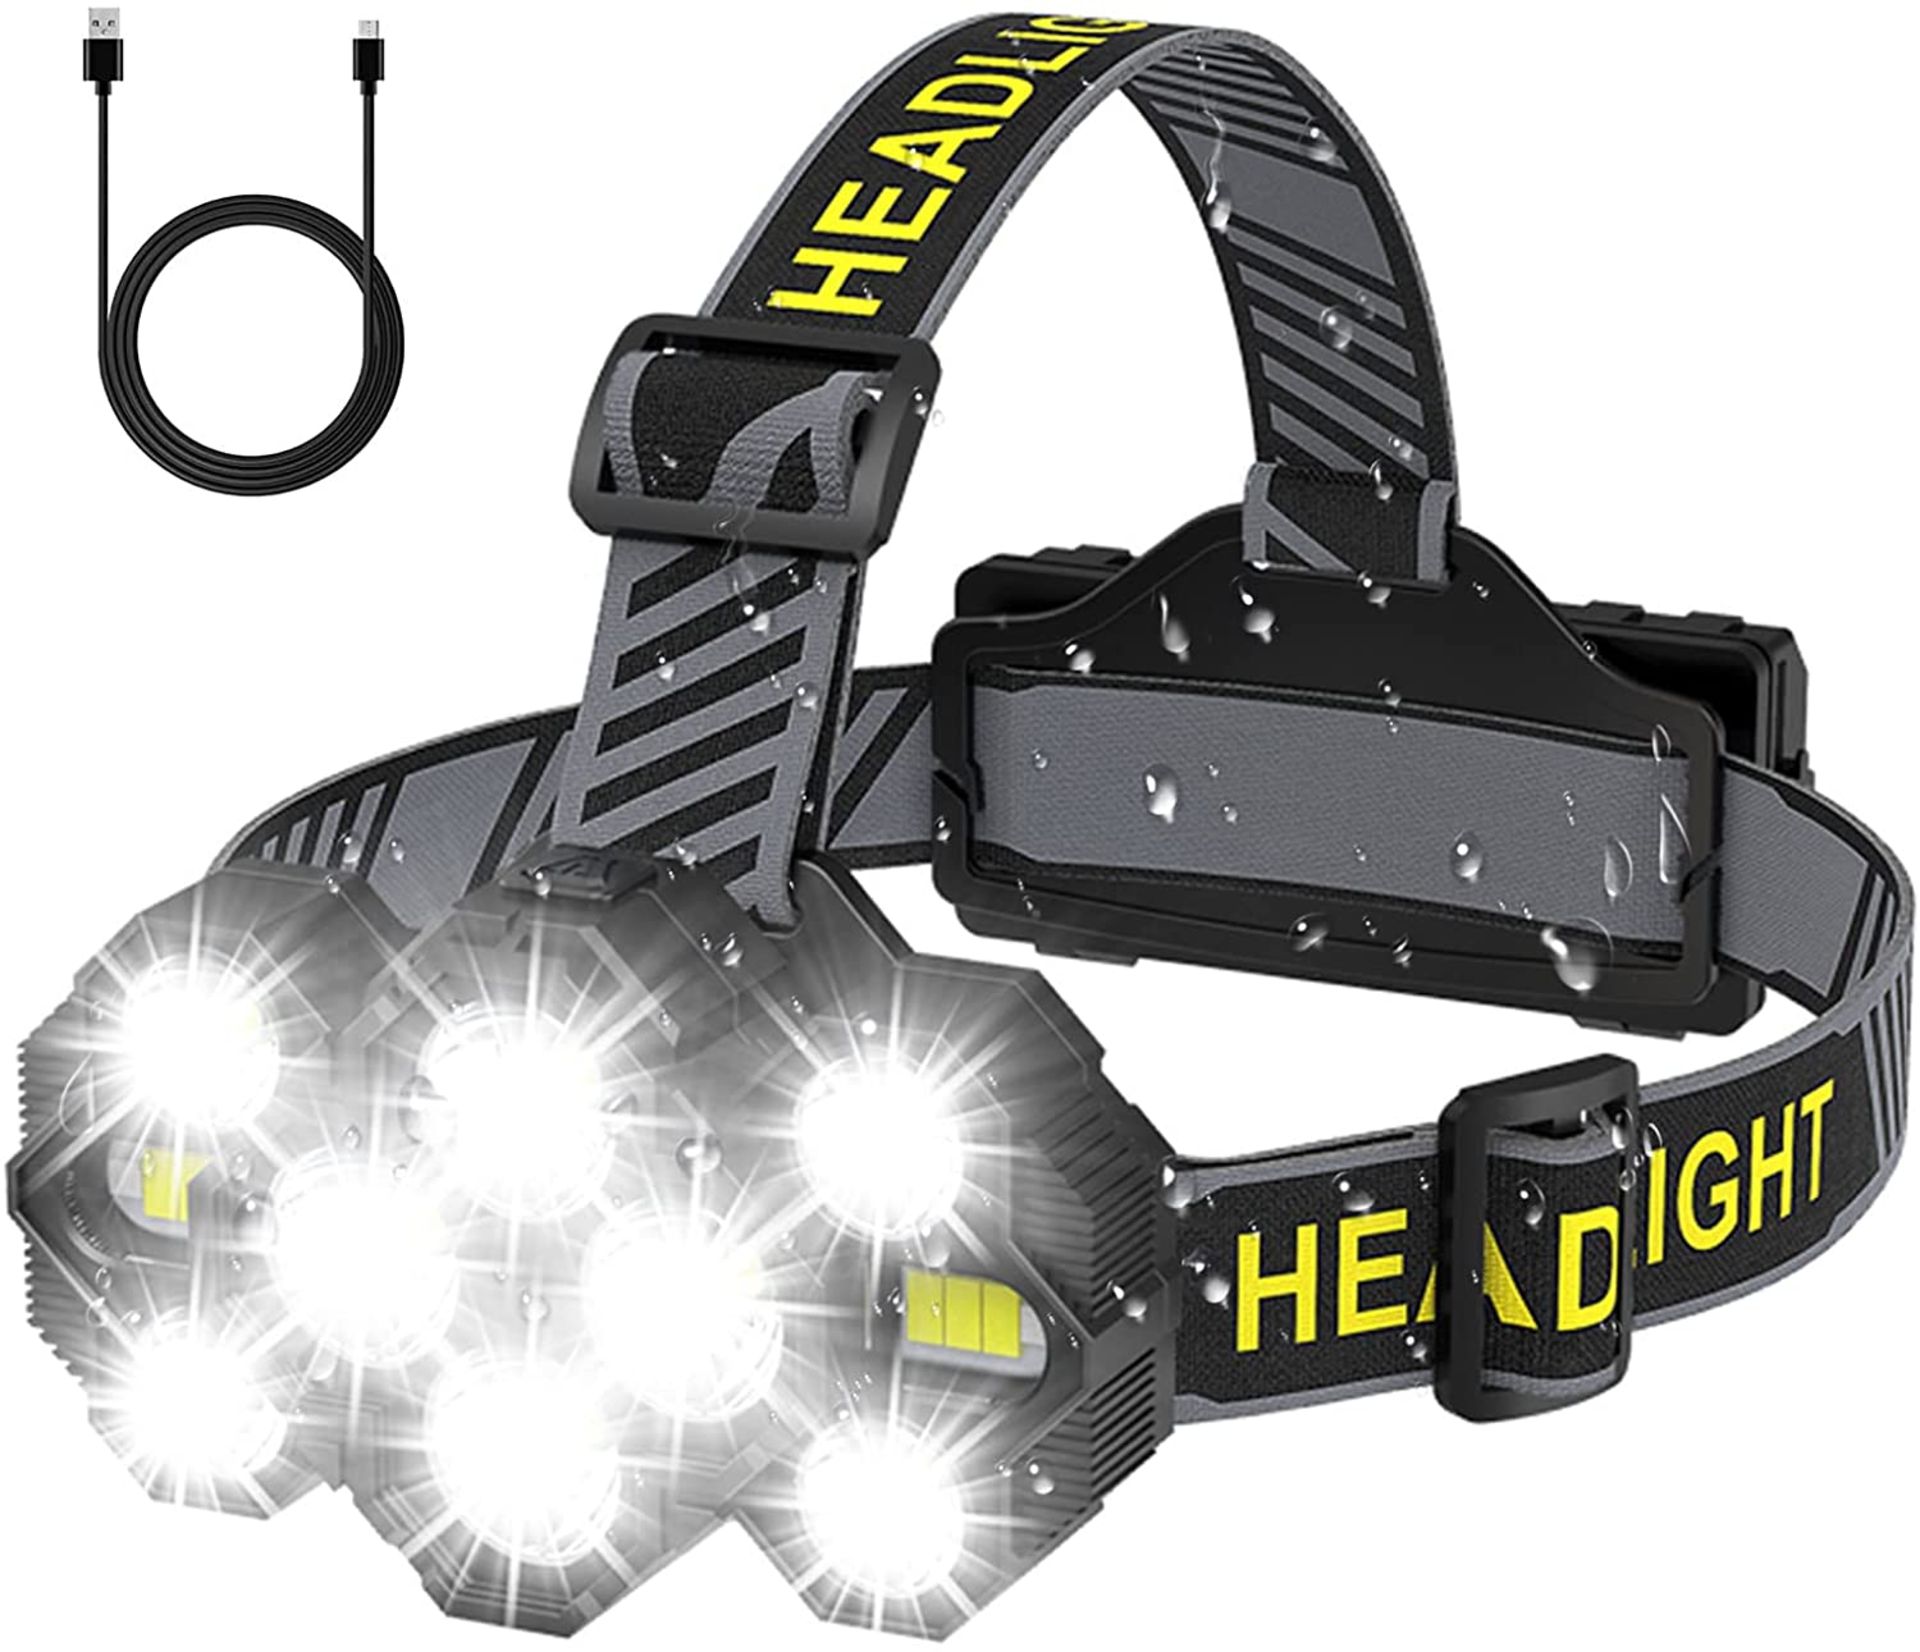 Victoper Head Torch 22000 Lumen LED Super Bright Rechargeable Headlight RRP £21.99